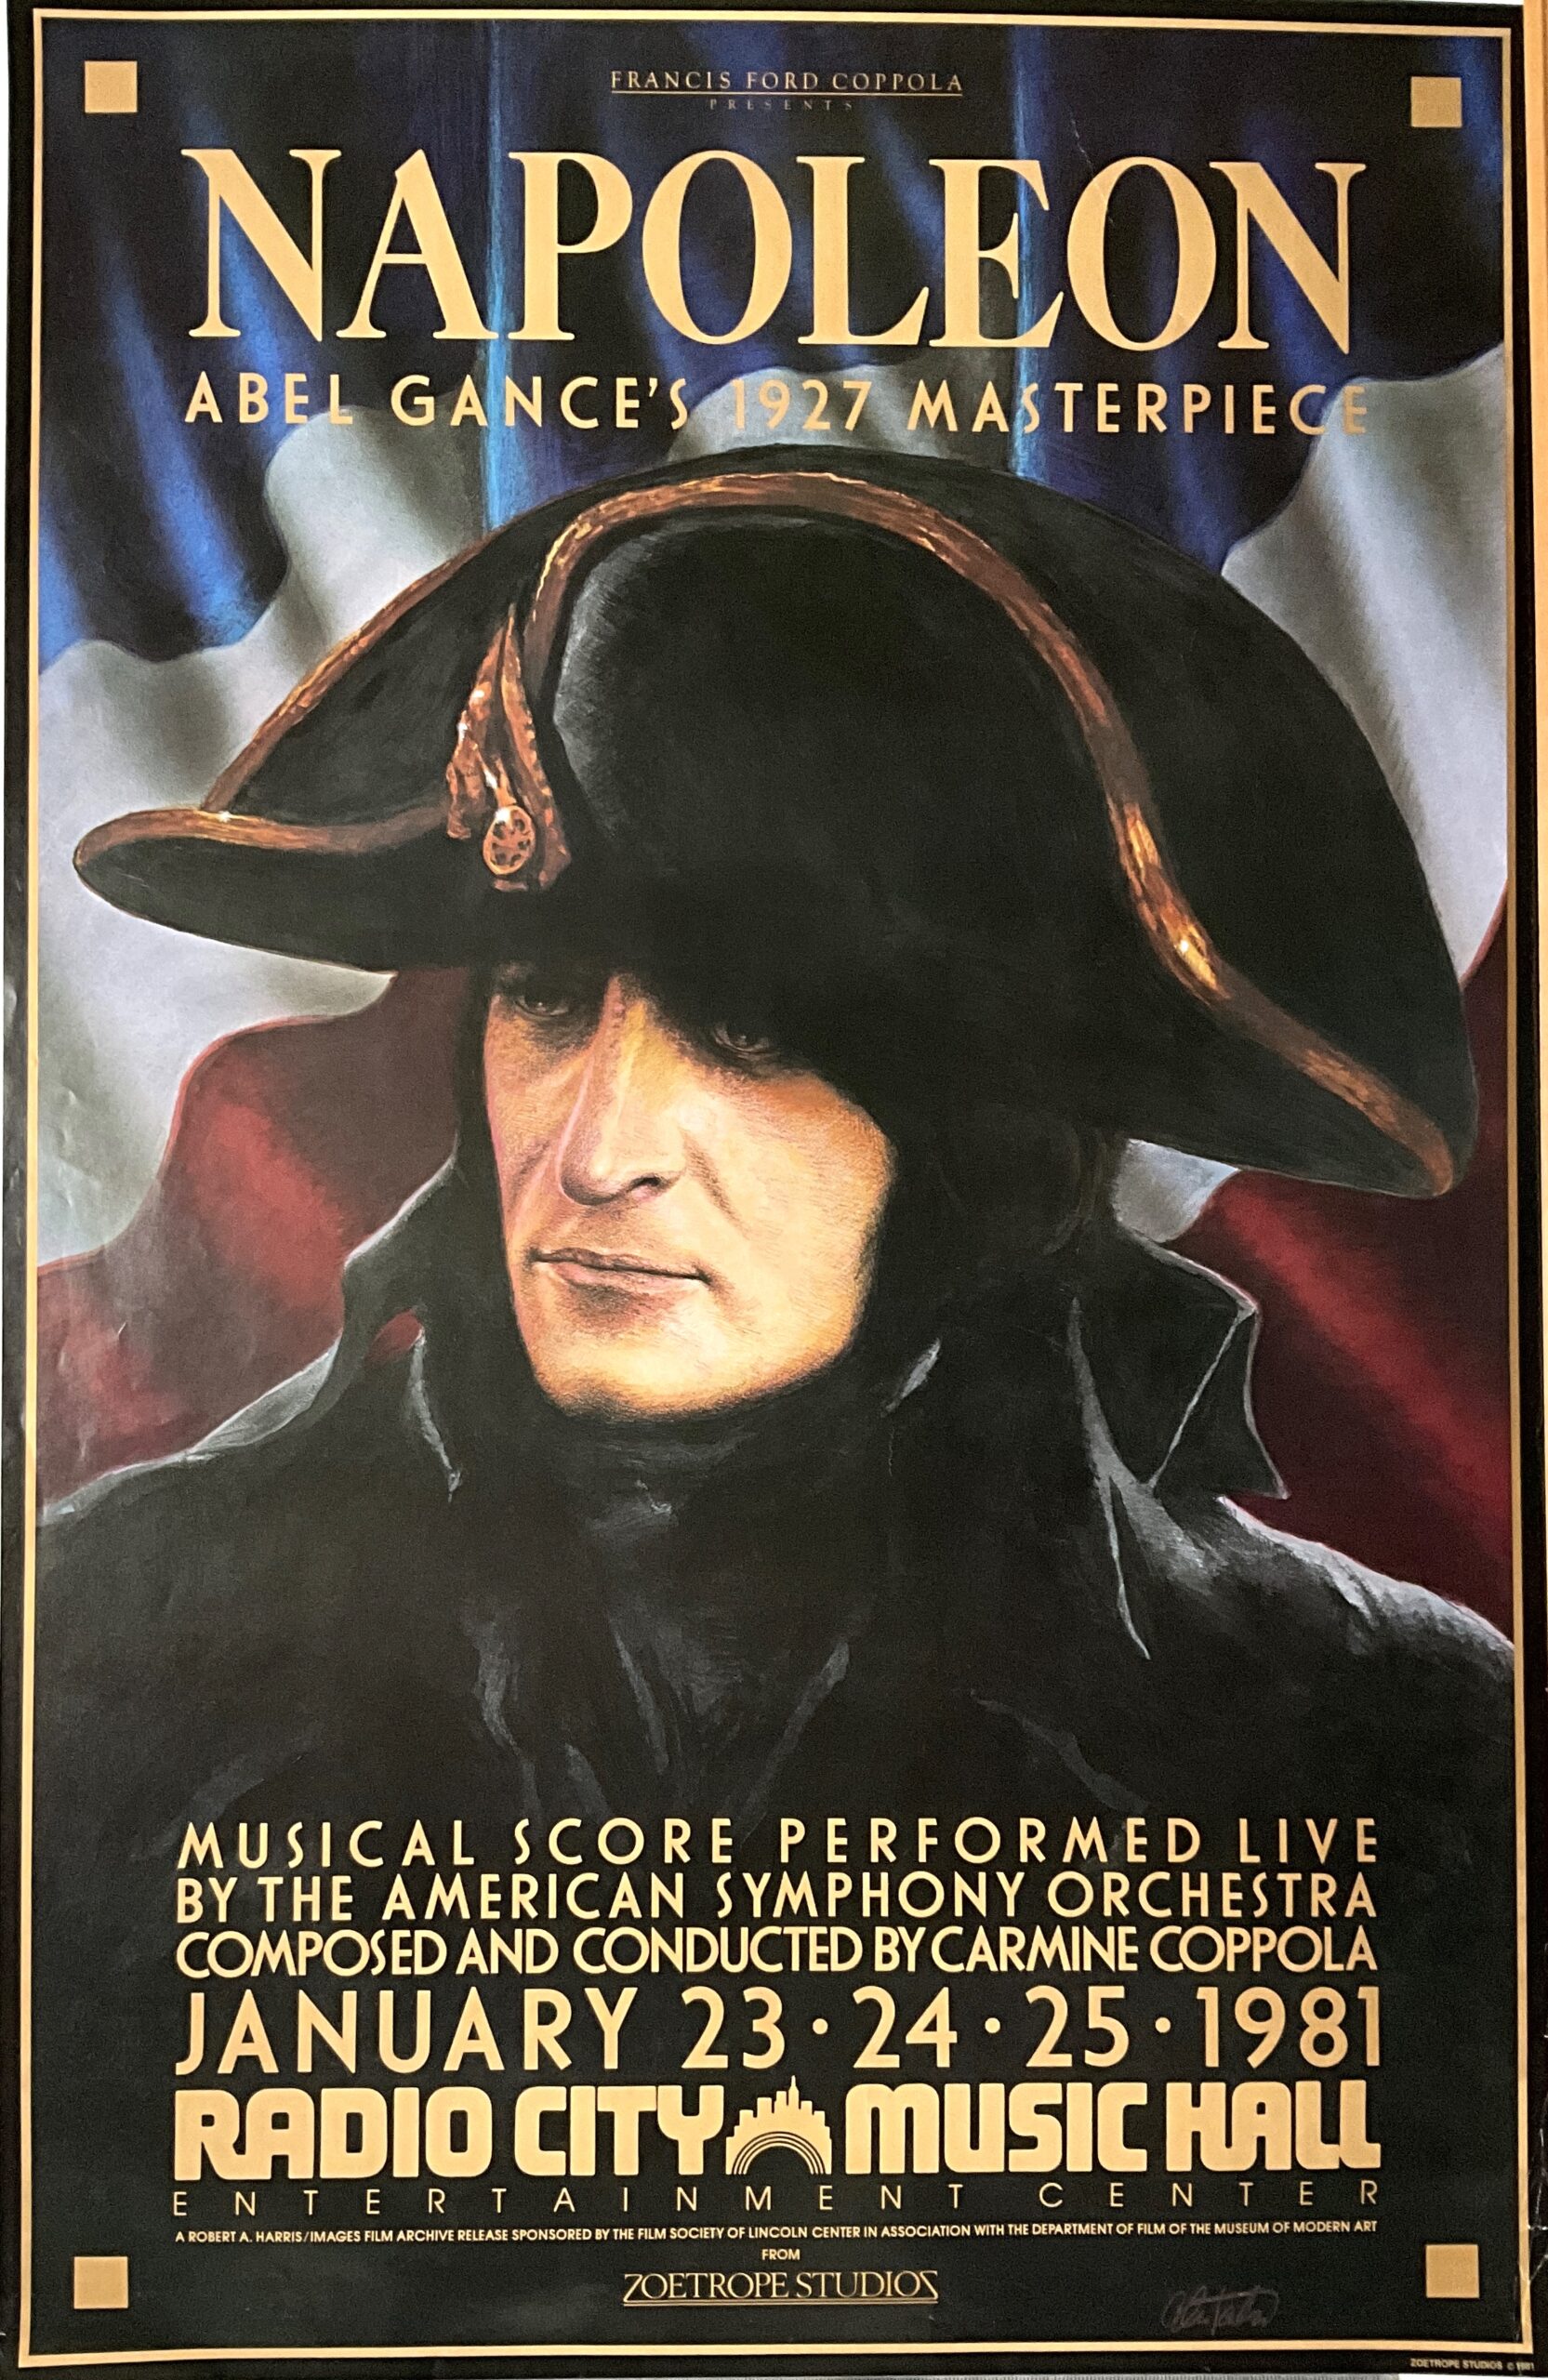 M657	NAPOLEON 1981 POSTER - FRANCIS FOR COPPOLA RADIO CITY MUSIC HALL PREMIER OF THE 1927 SILENT FEATURE